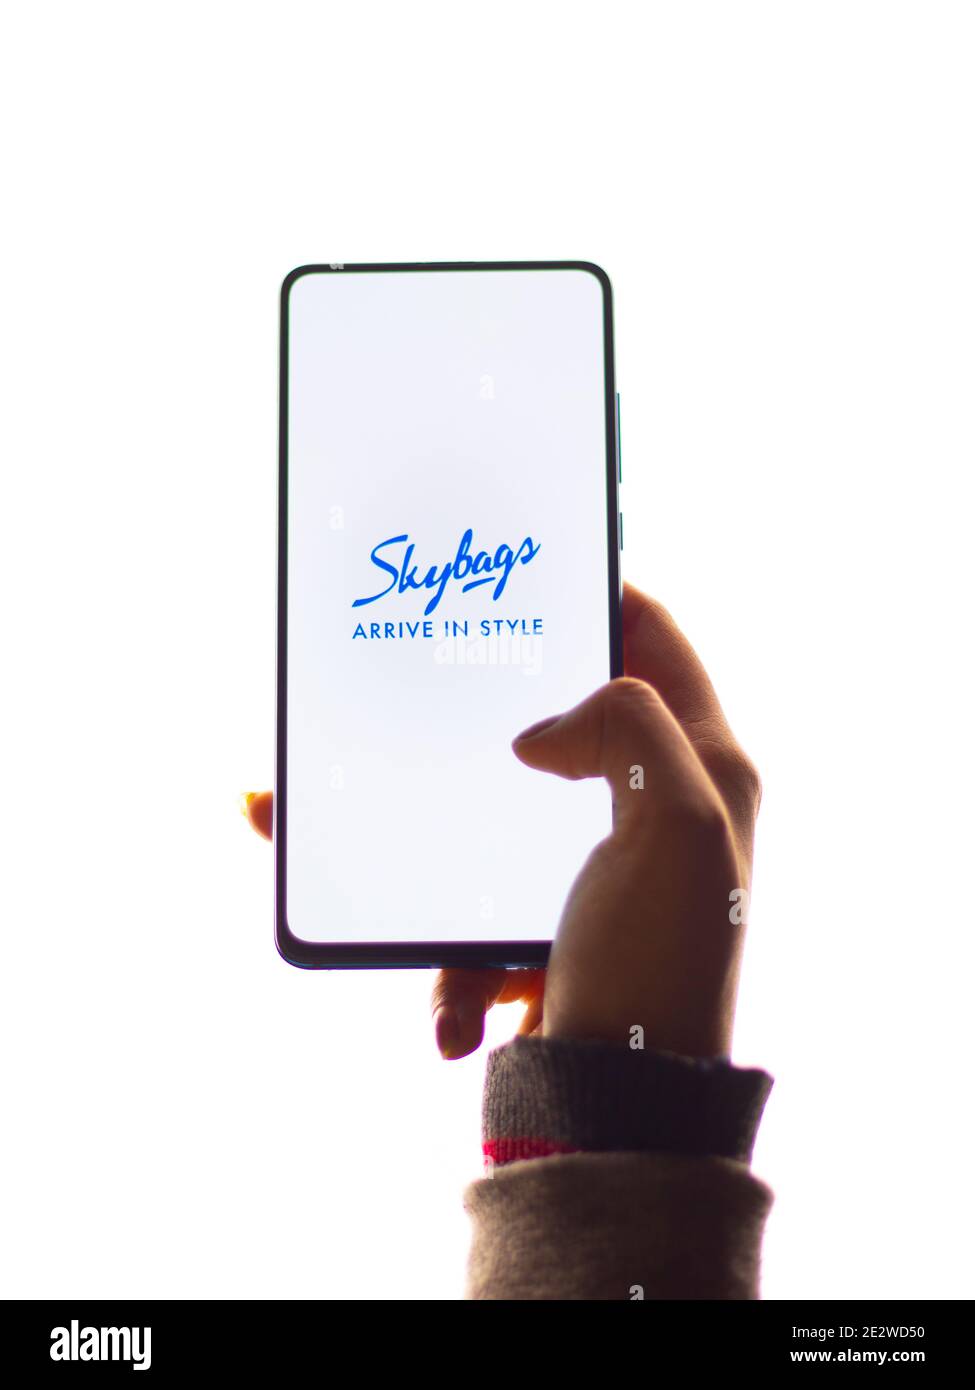 assam india january 15 2020 skybags logo on phone screen stock image 2E2WD50